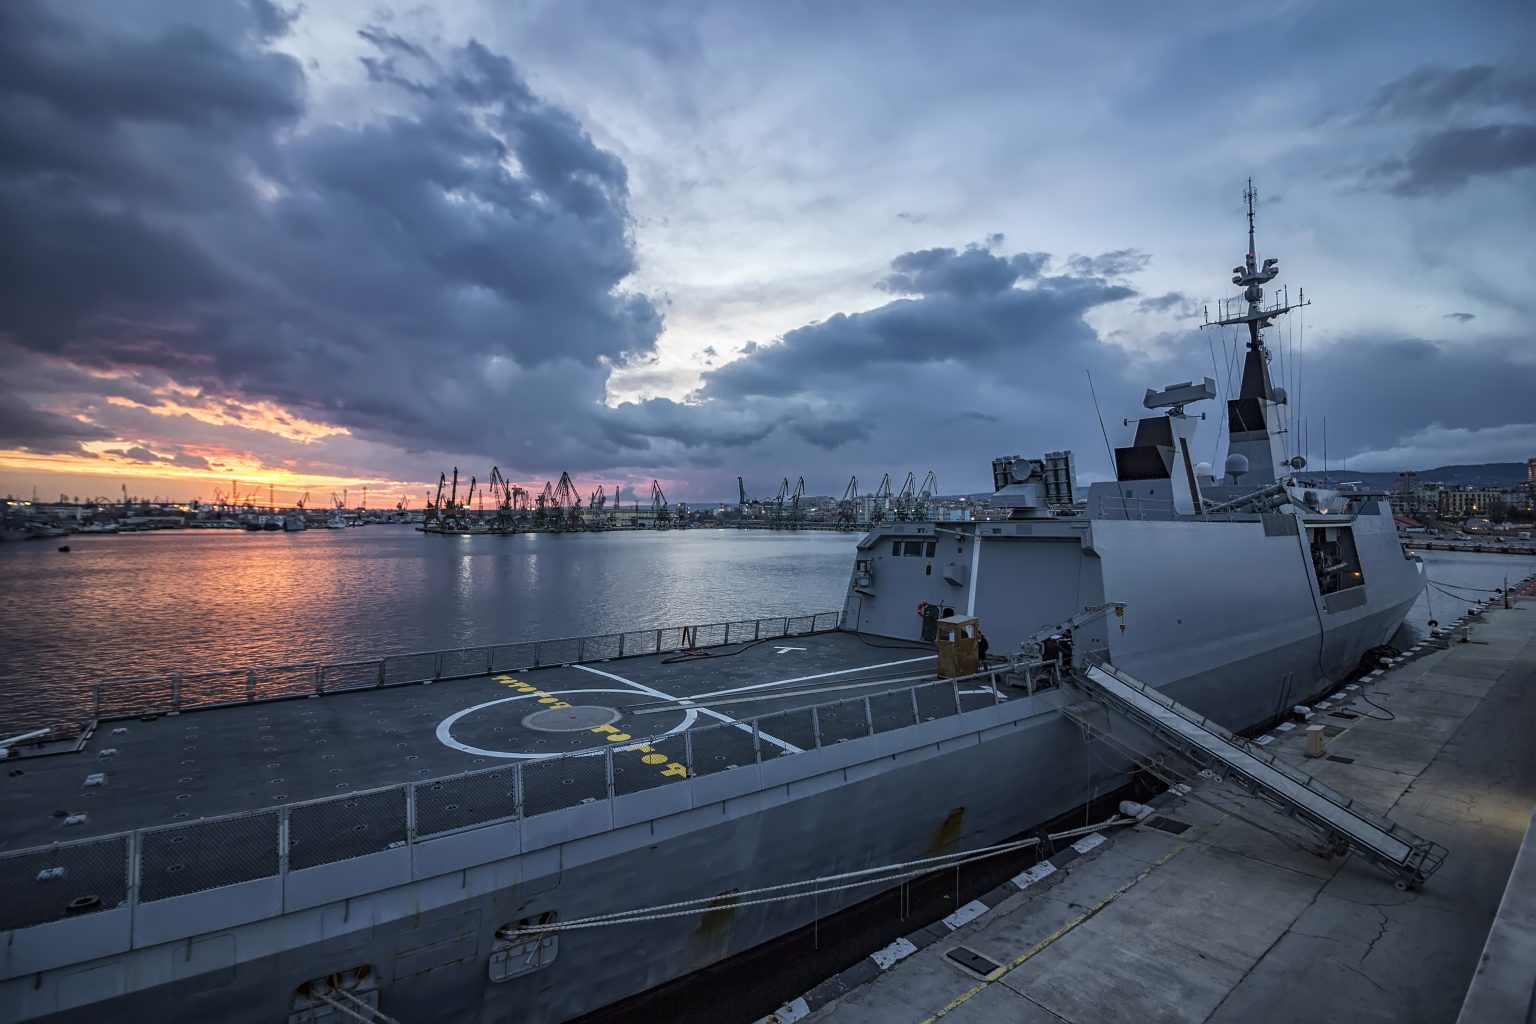 Part of frigate naval forces at sunset at the port. Warship